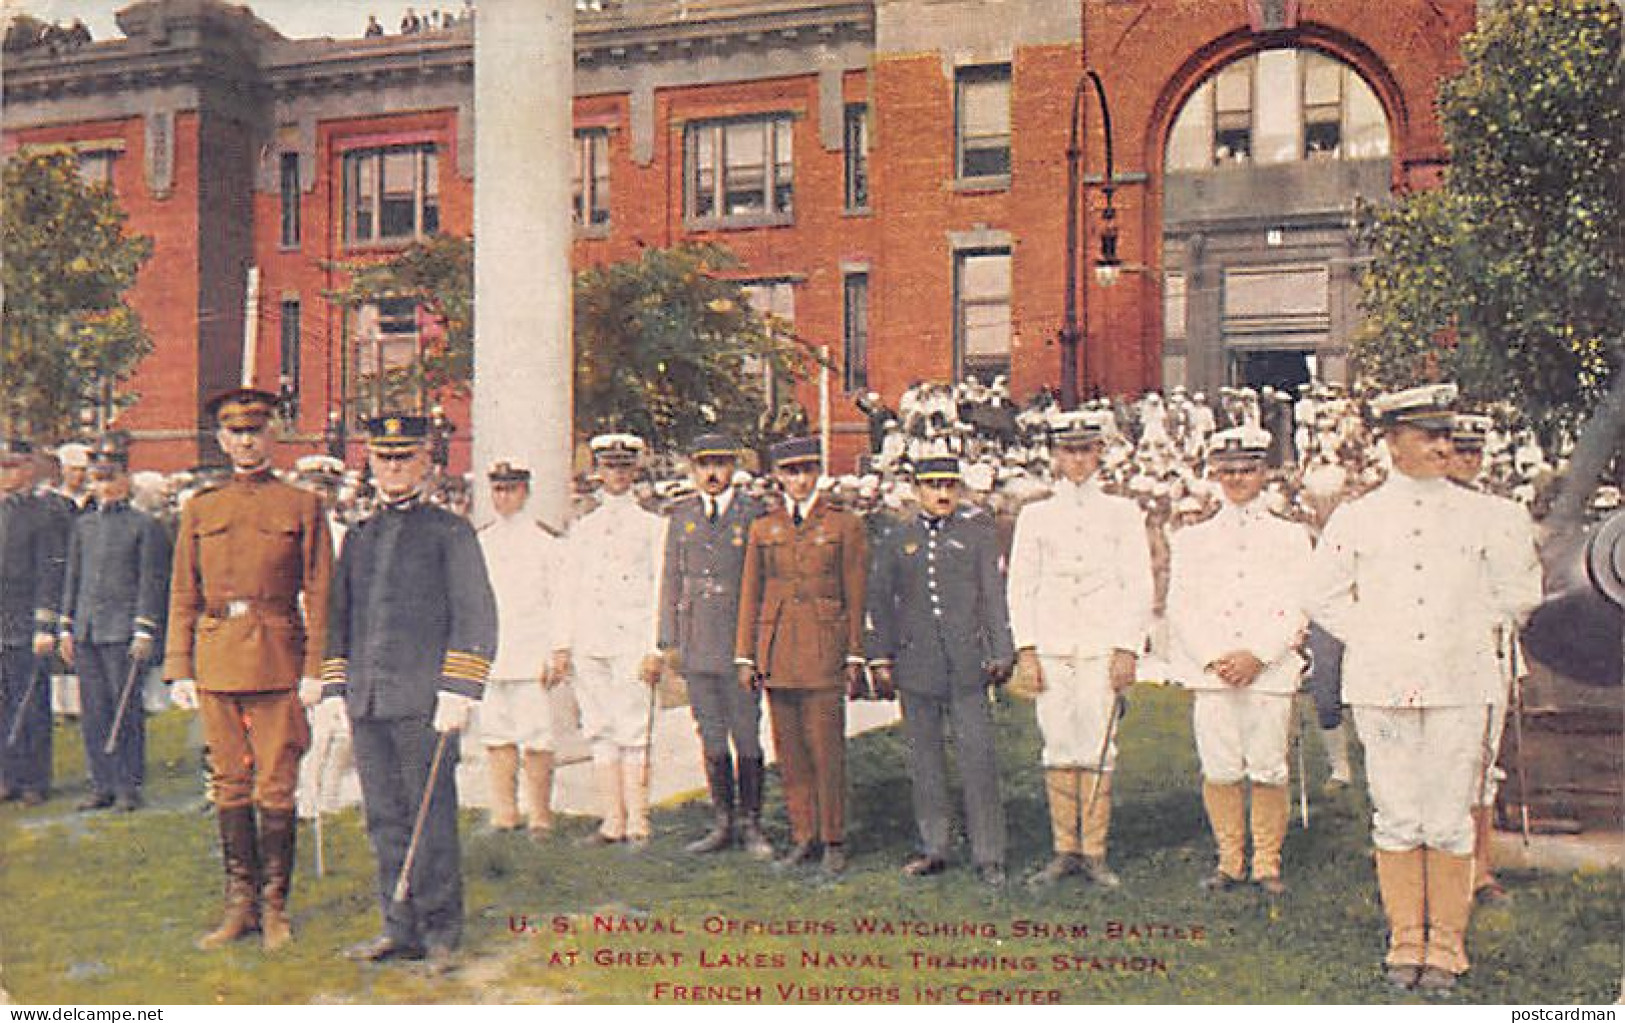 Usa - CHICAGO (IL) Naval Station Great Lakes - U.S. Naval Officers Watching Sham Battle - French Visitors In Center - Chicago